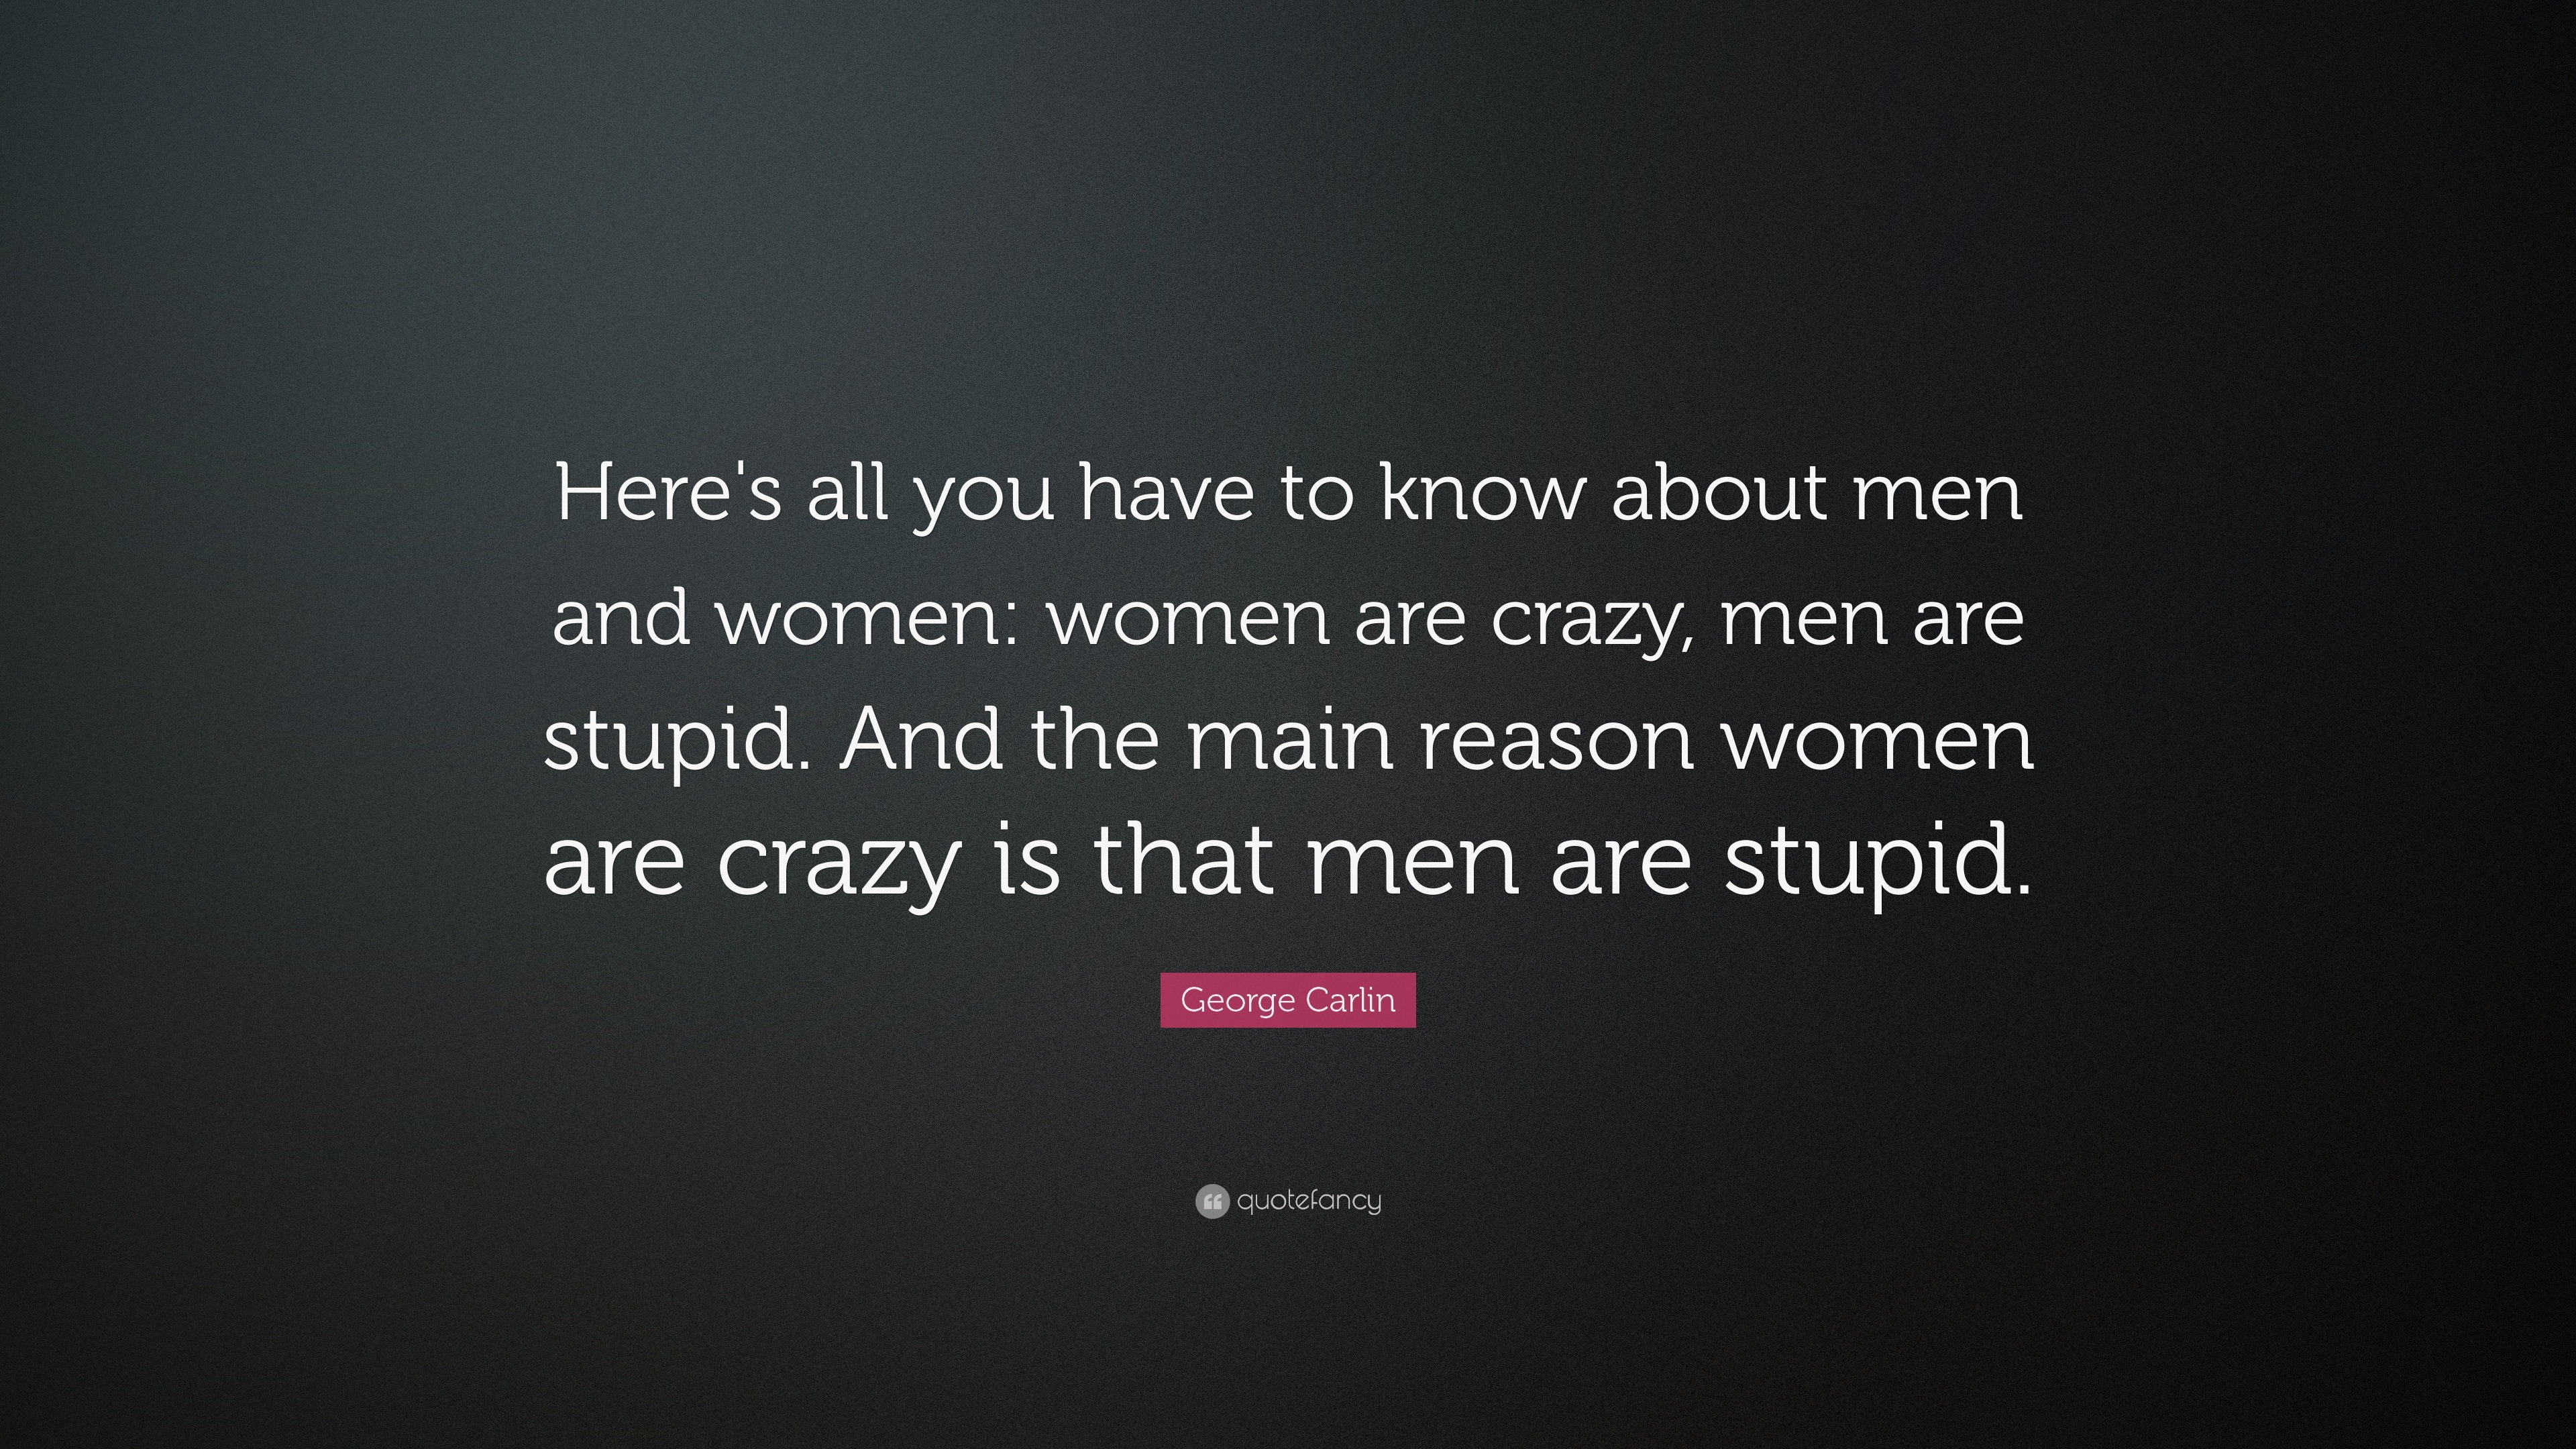 Women crazy are why Perimenopause Rage: